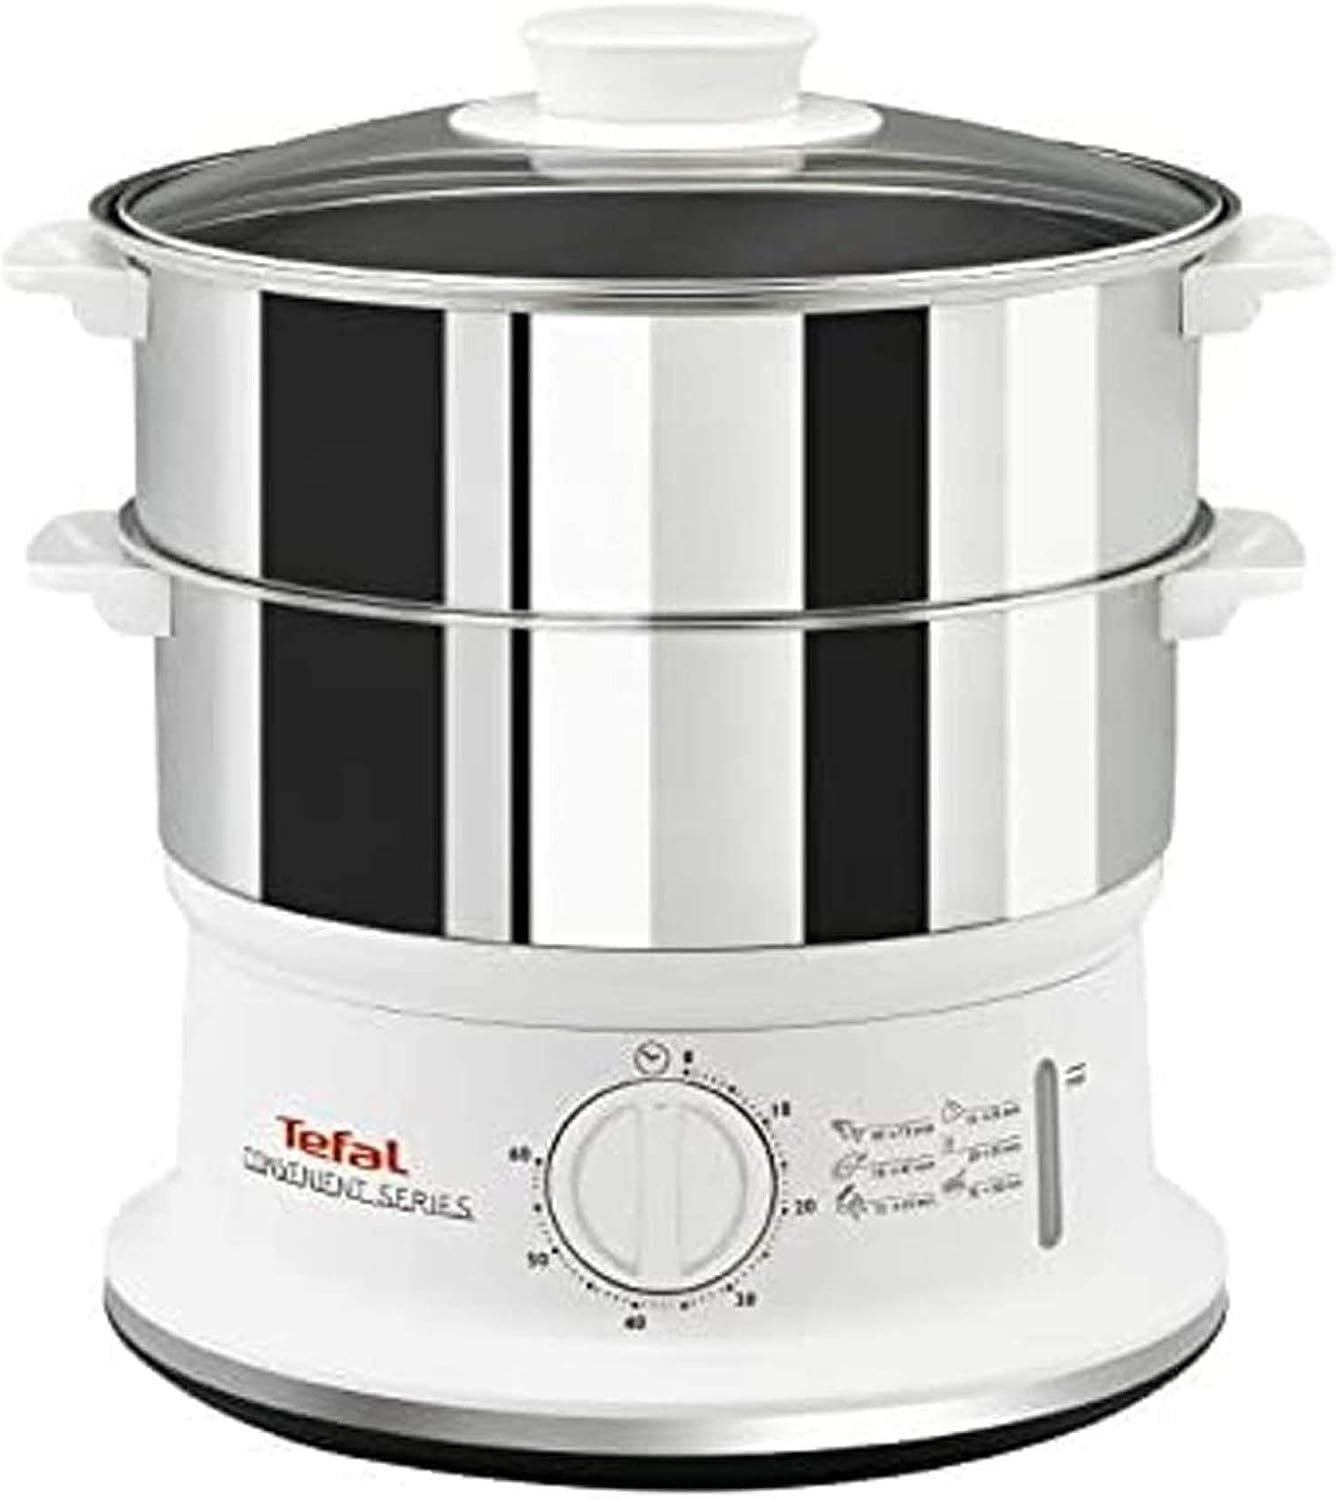 Tefal VC145140 Convenient Series Steamer, 2 Durable Stainless Steel Bowls, Silver